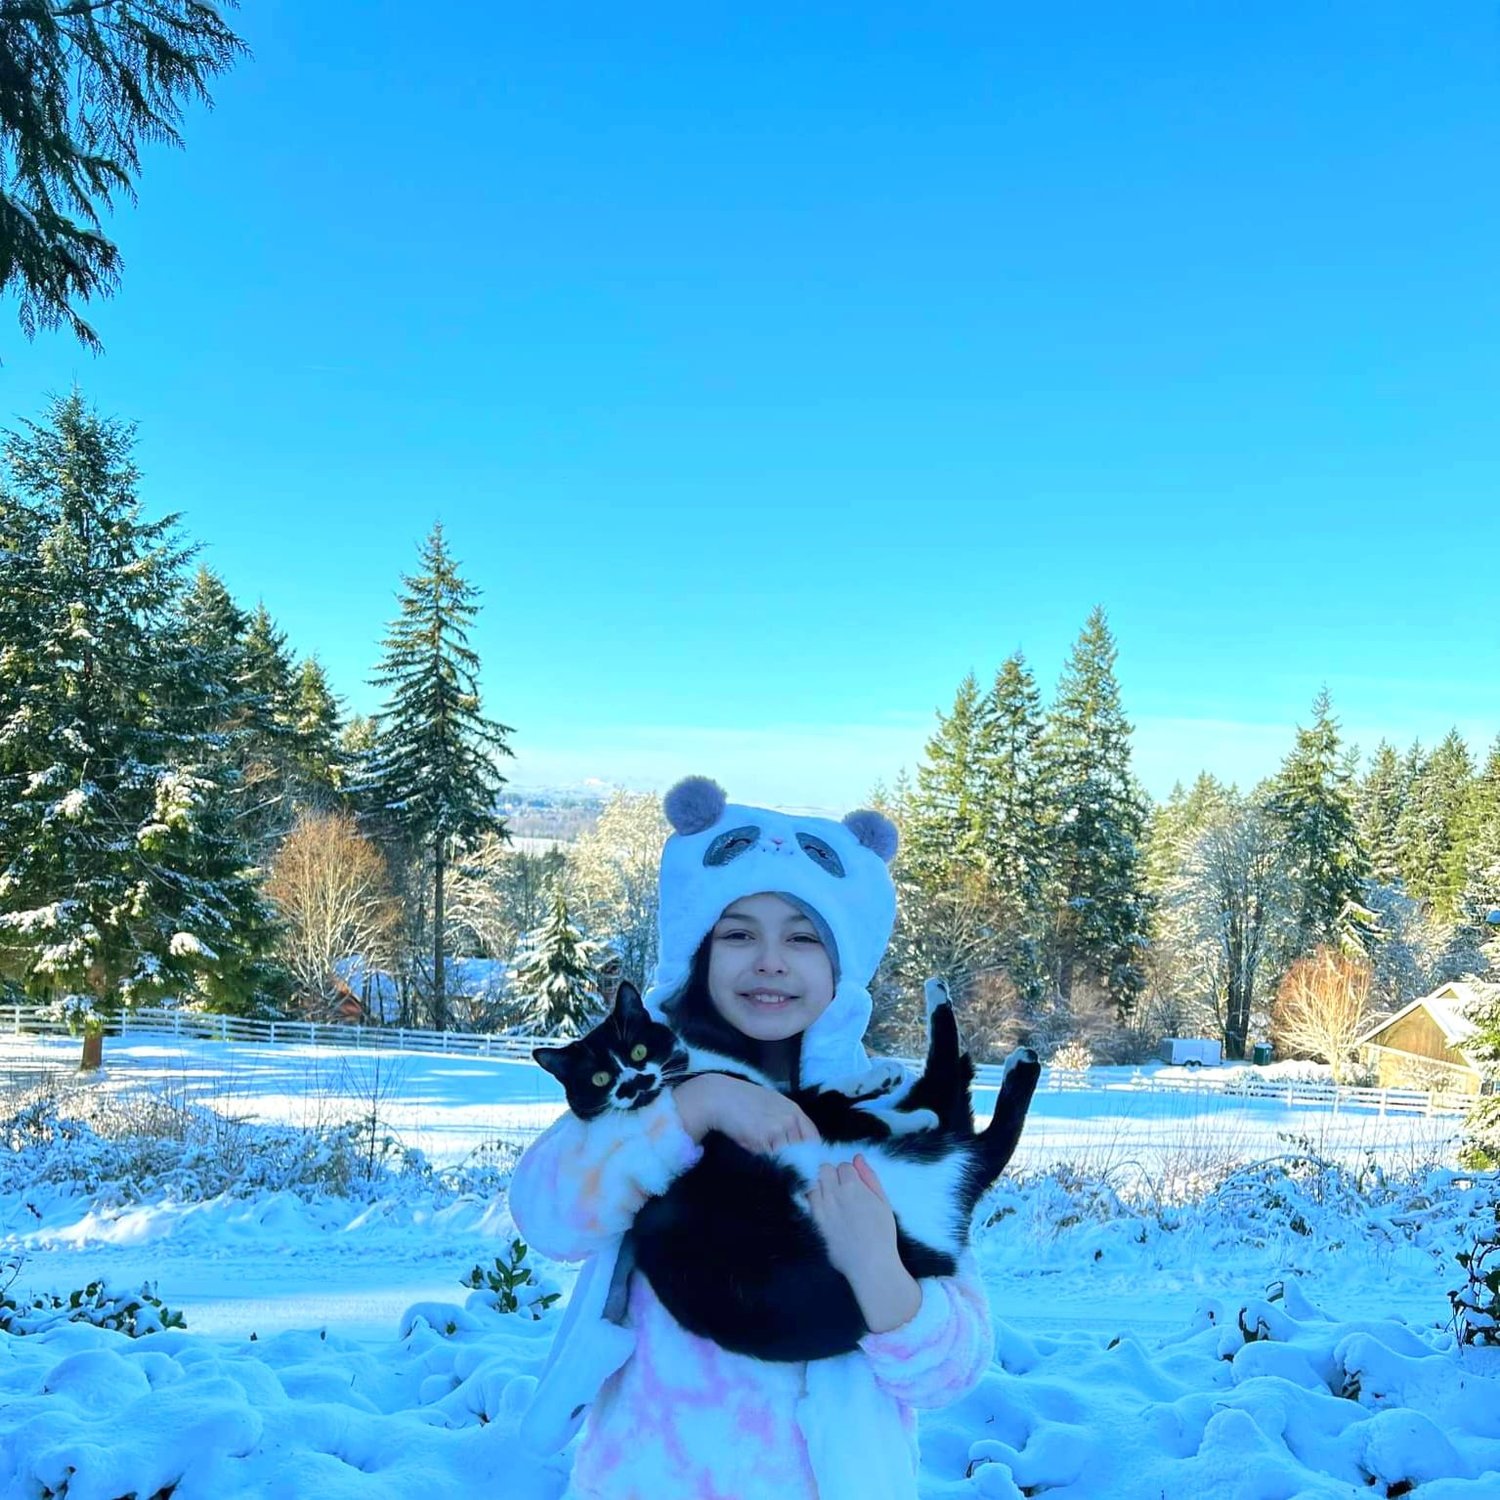 "Quinn Cornelio and her mustache kitty 'Stashia.' Stashia was not a fan of the snow, and after taking these photos she hopped back inside to safety." Photo taken by Kaleb Gaskill in Chehalis.